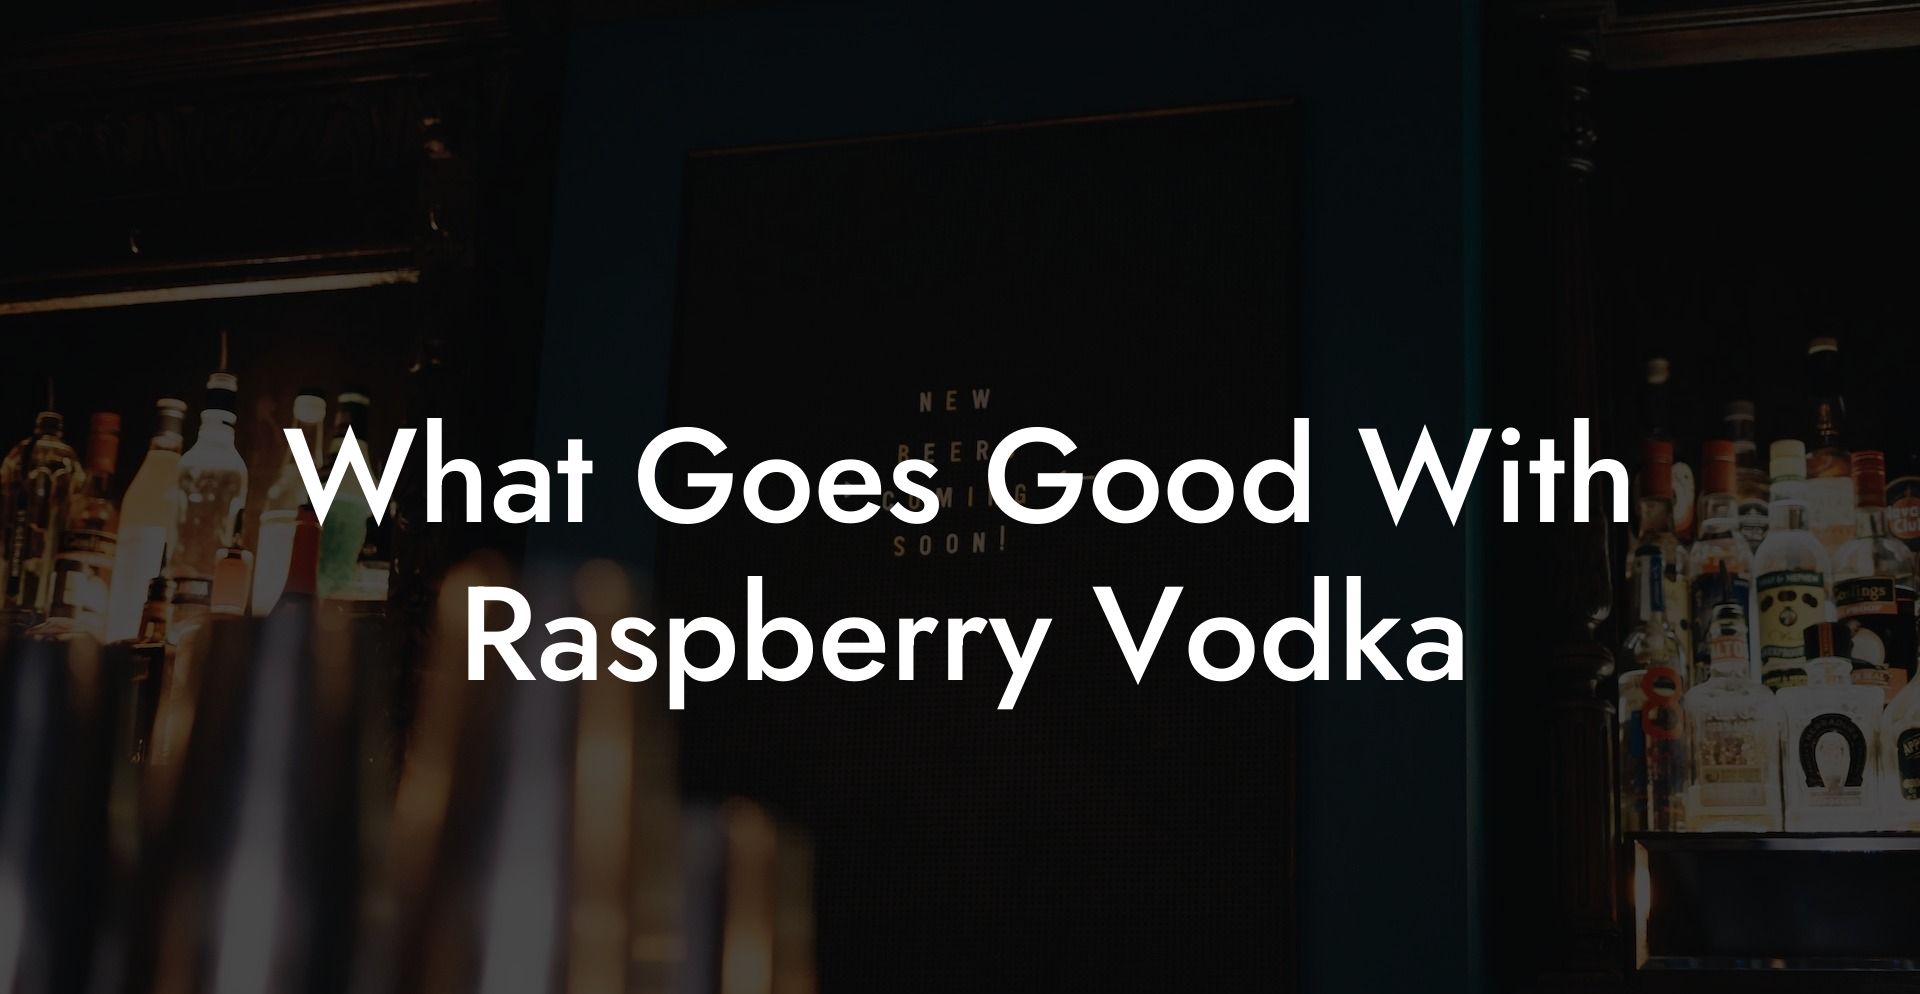 What Goes Good With Raspberry Vodka